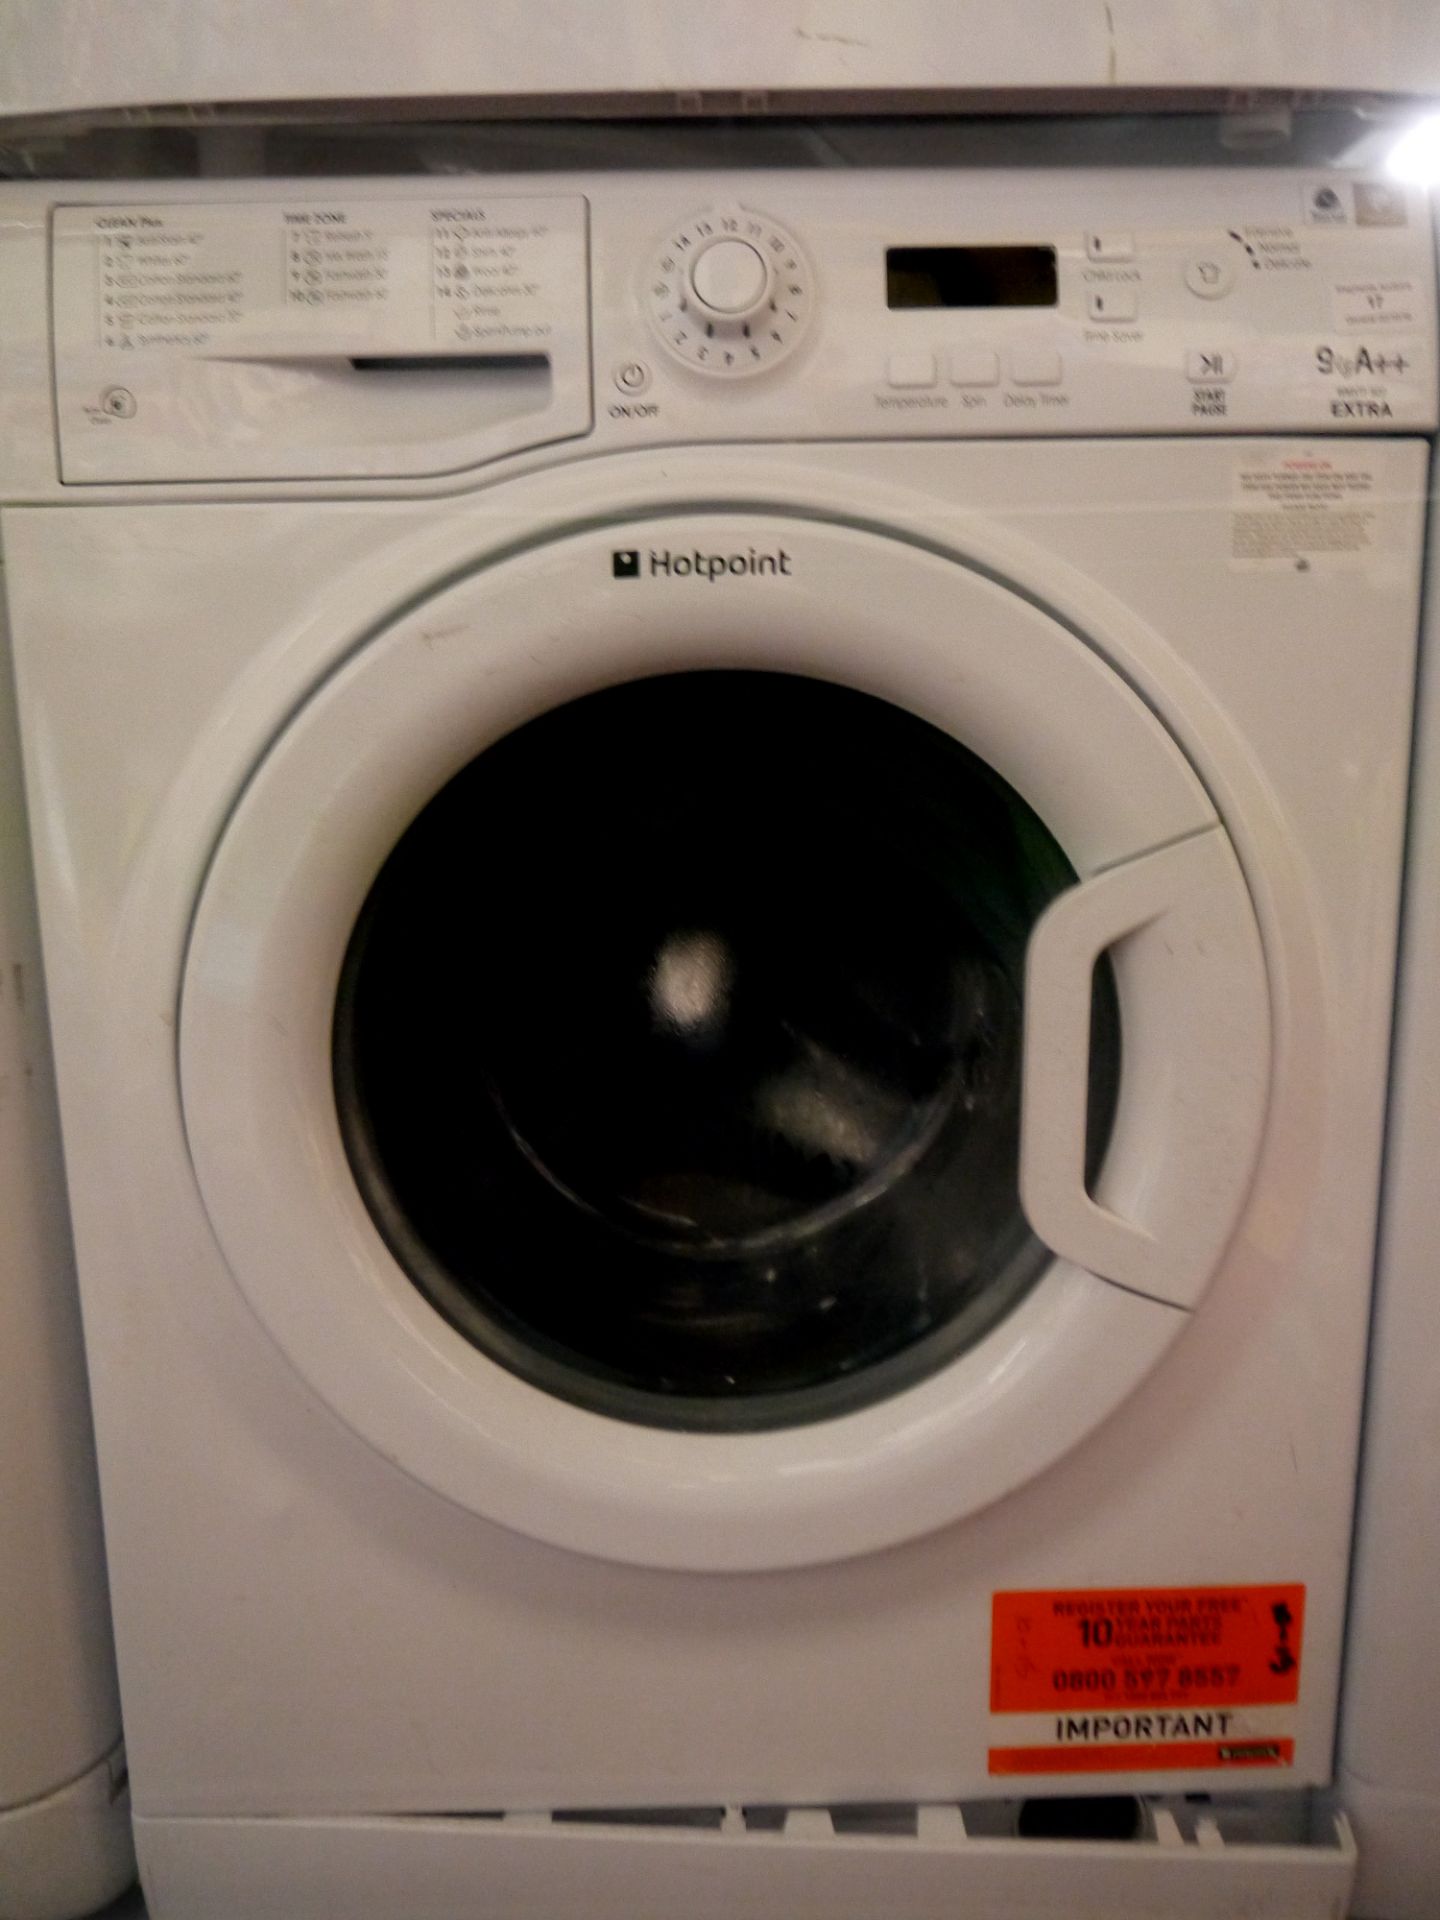 Hotpoint 9kg washing machine, powers on and spins.